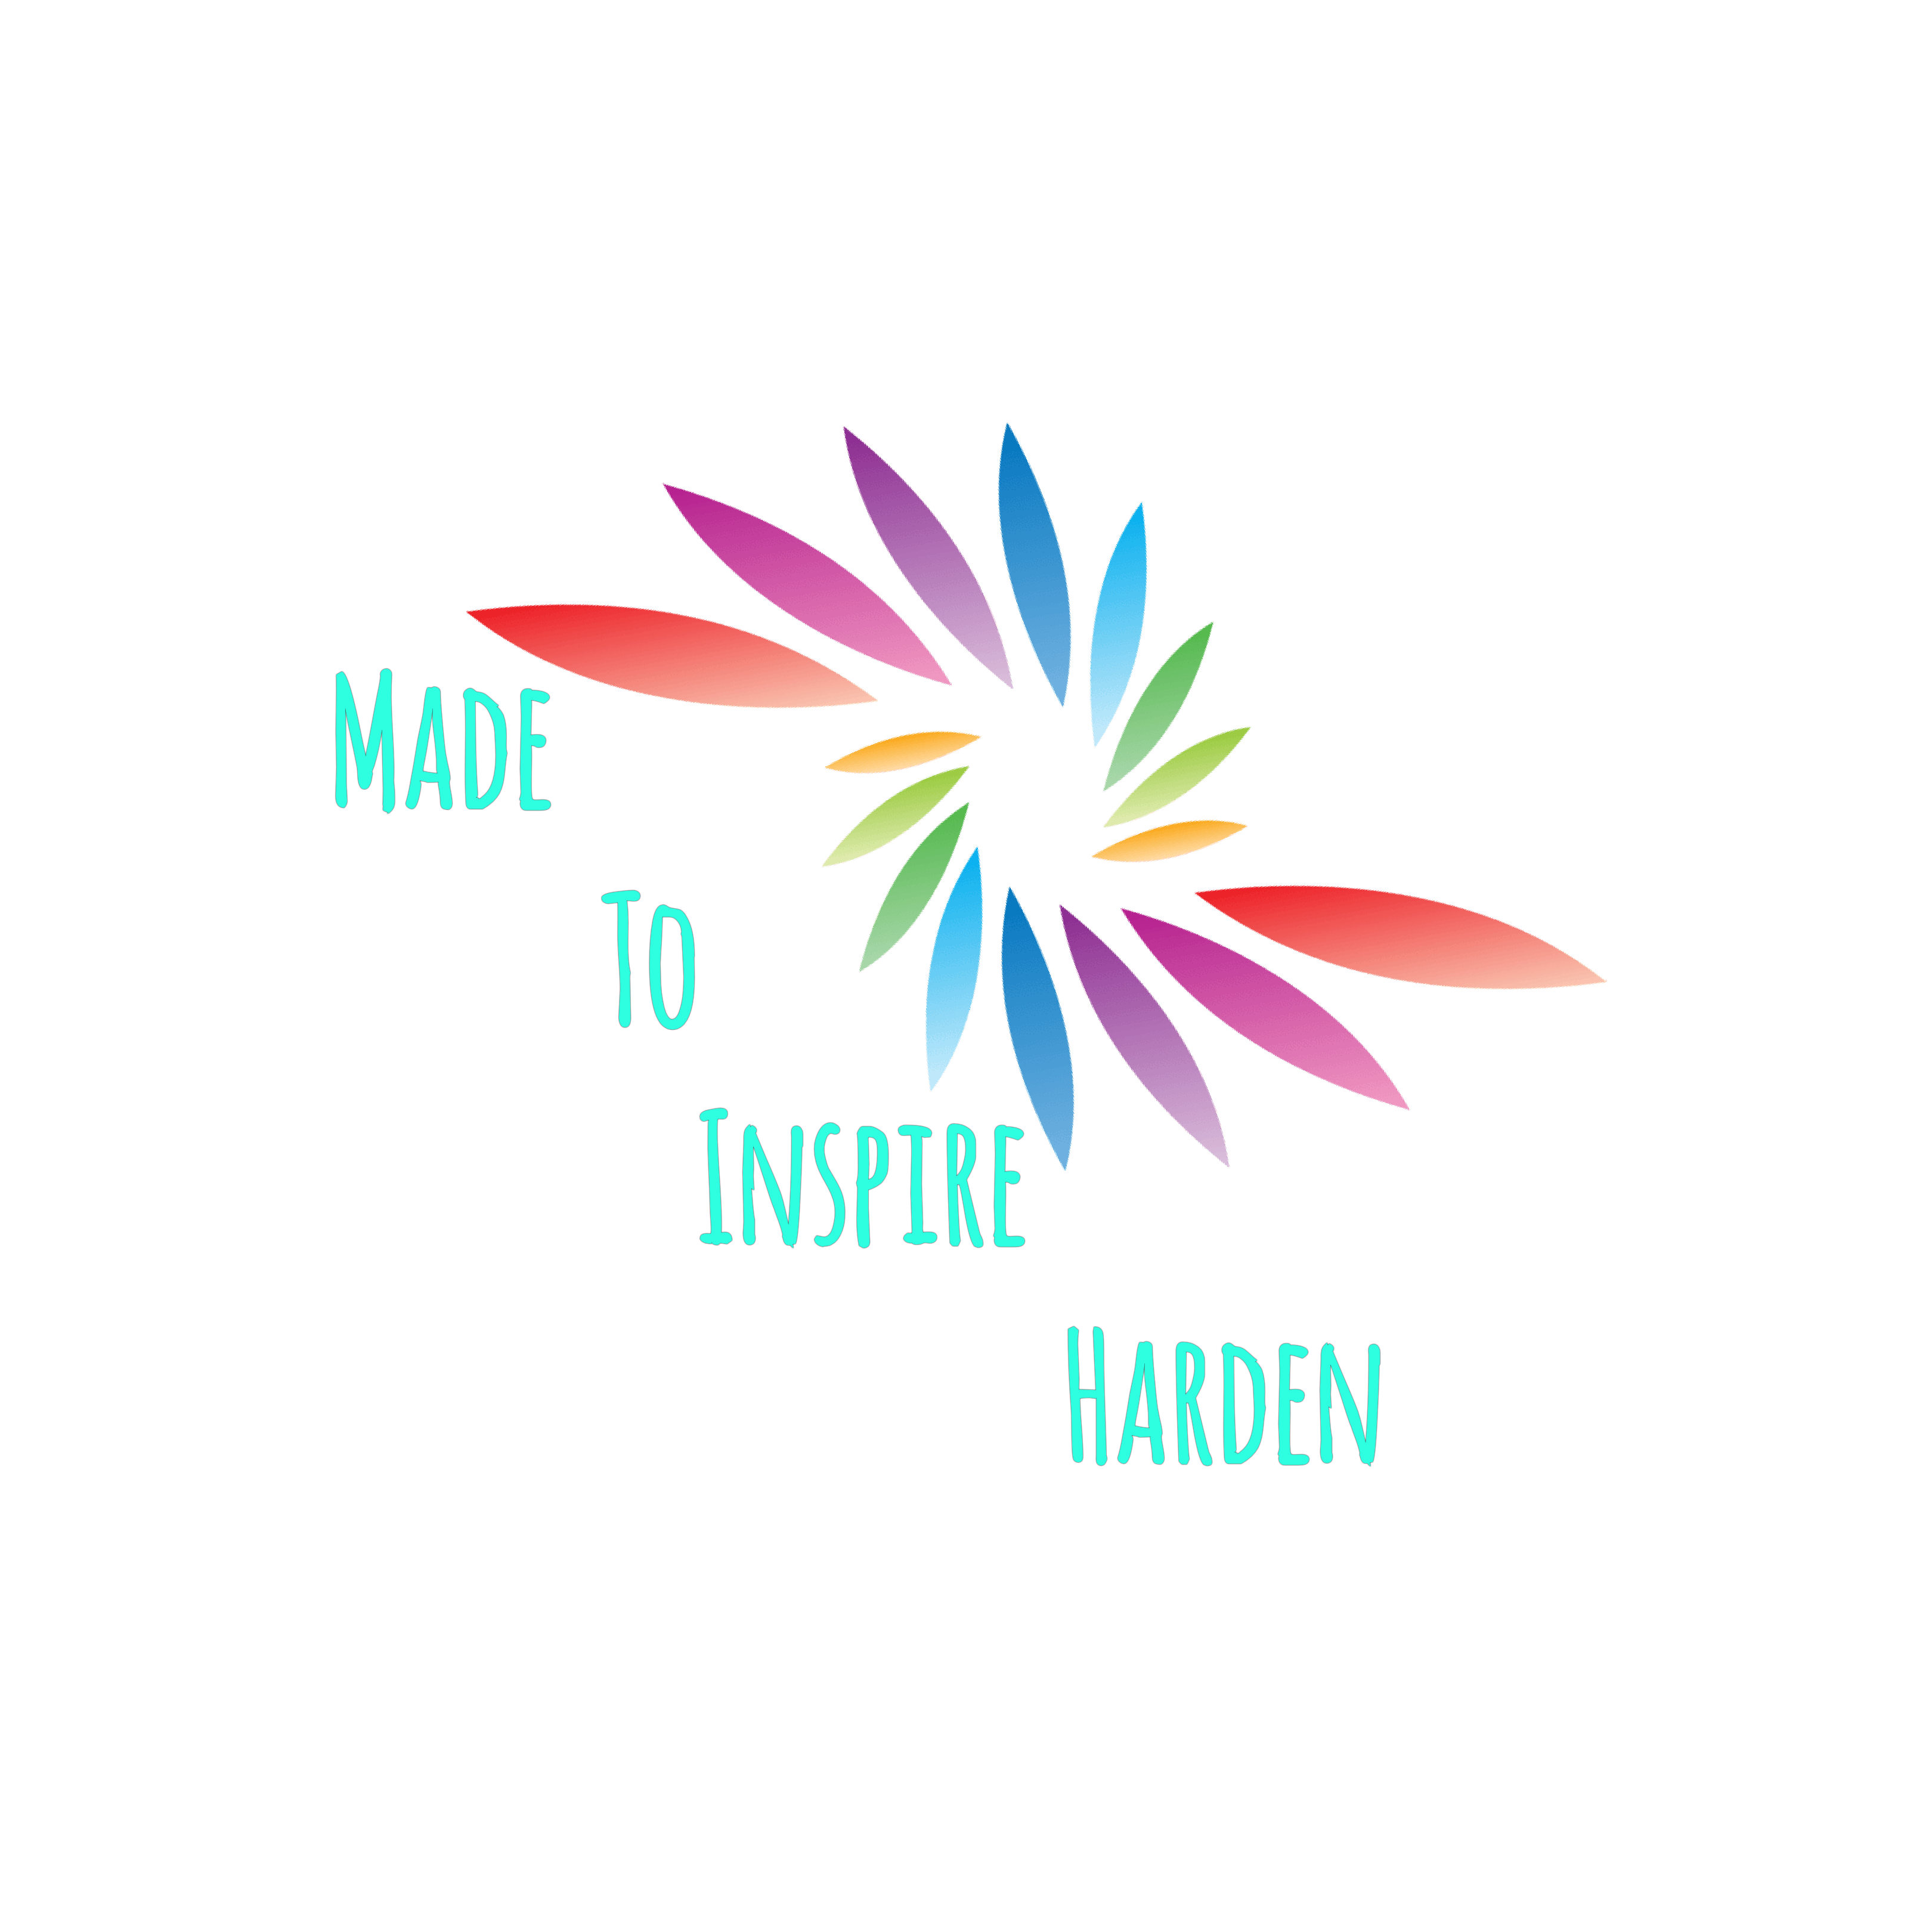 made-to-inspire-harden